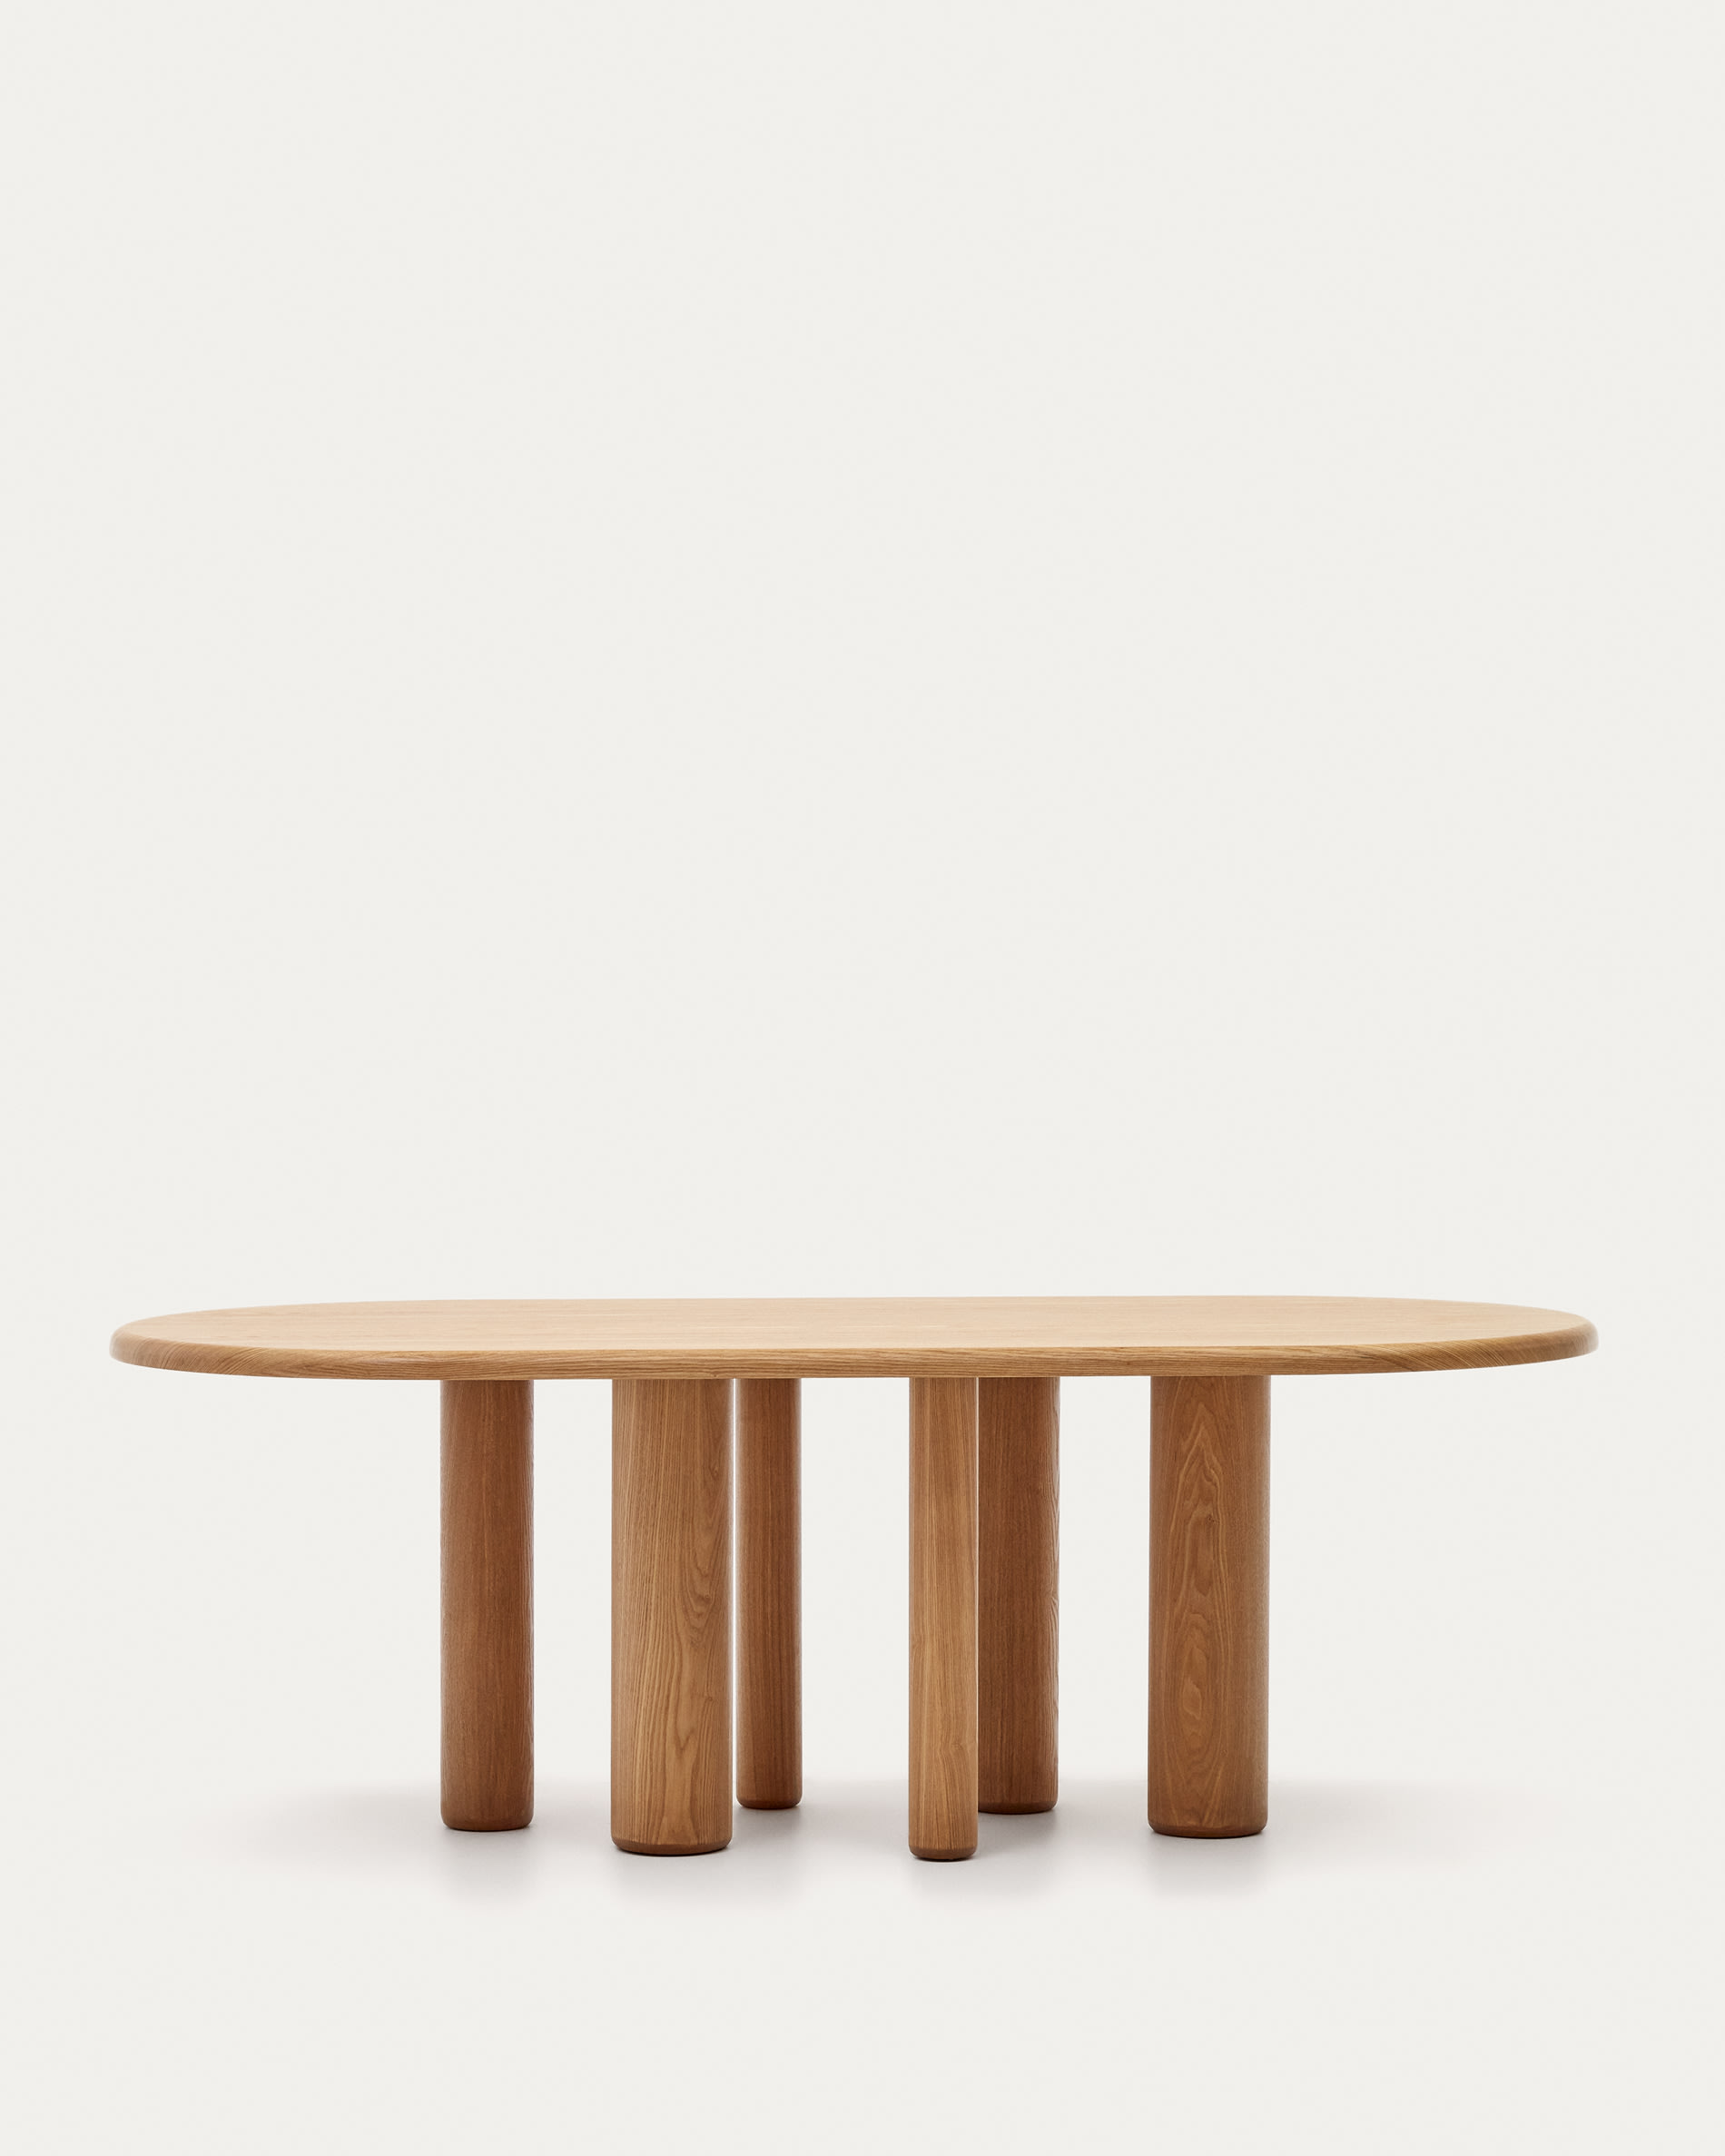 Mailen oval table in ash wood veneer with natural finish, Ø 220 x 105 cm